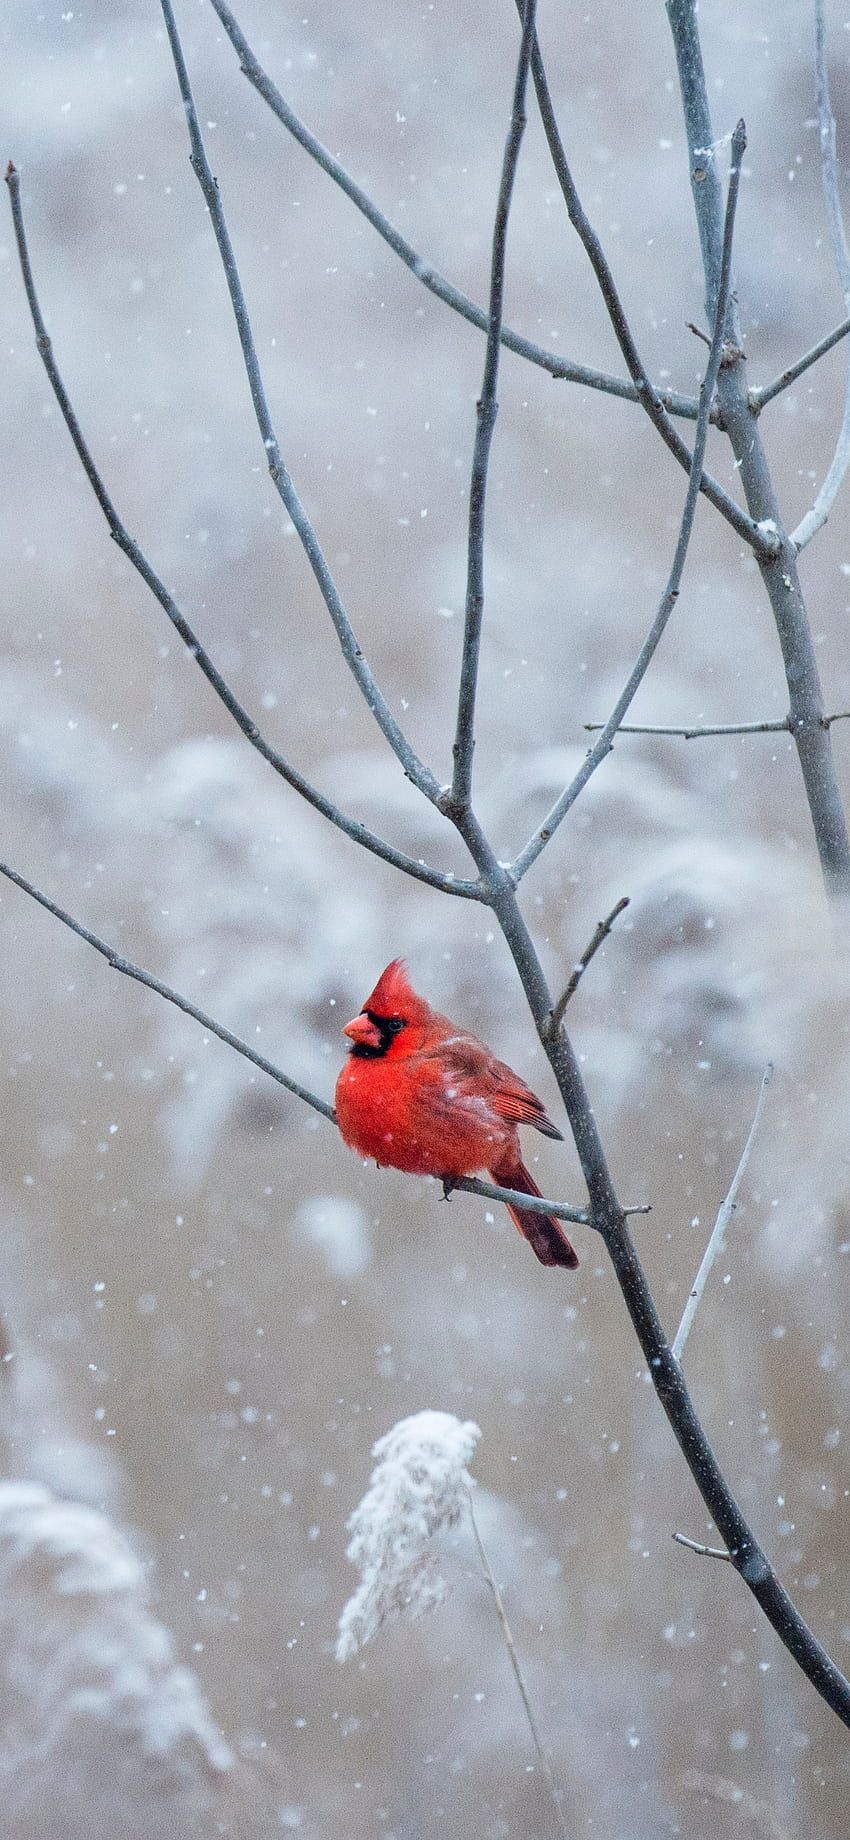 A red bird sitting on top of tree - 